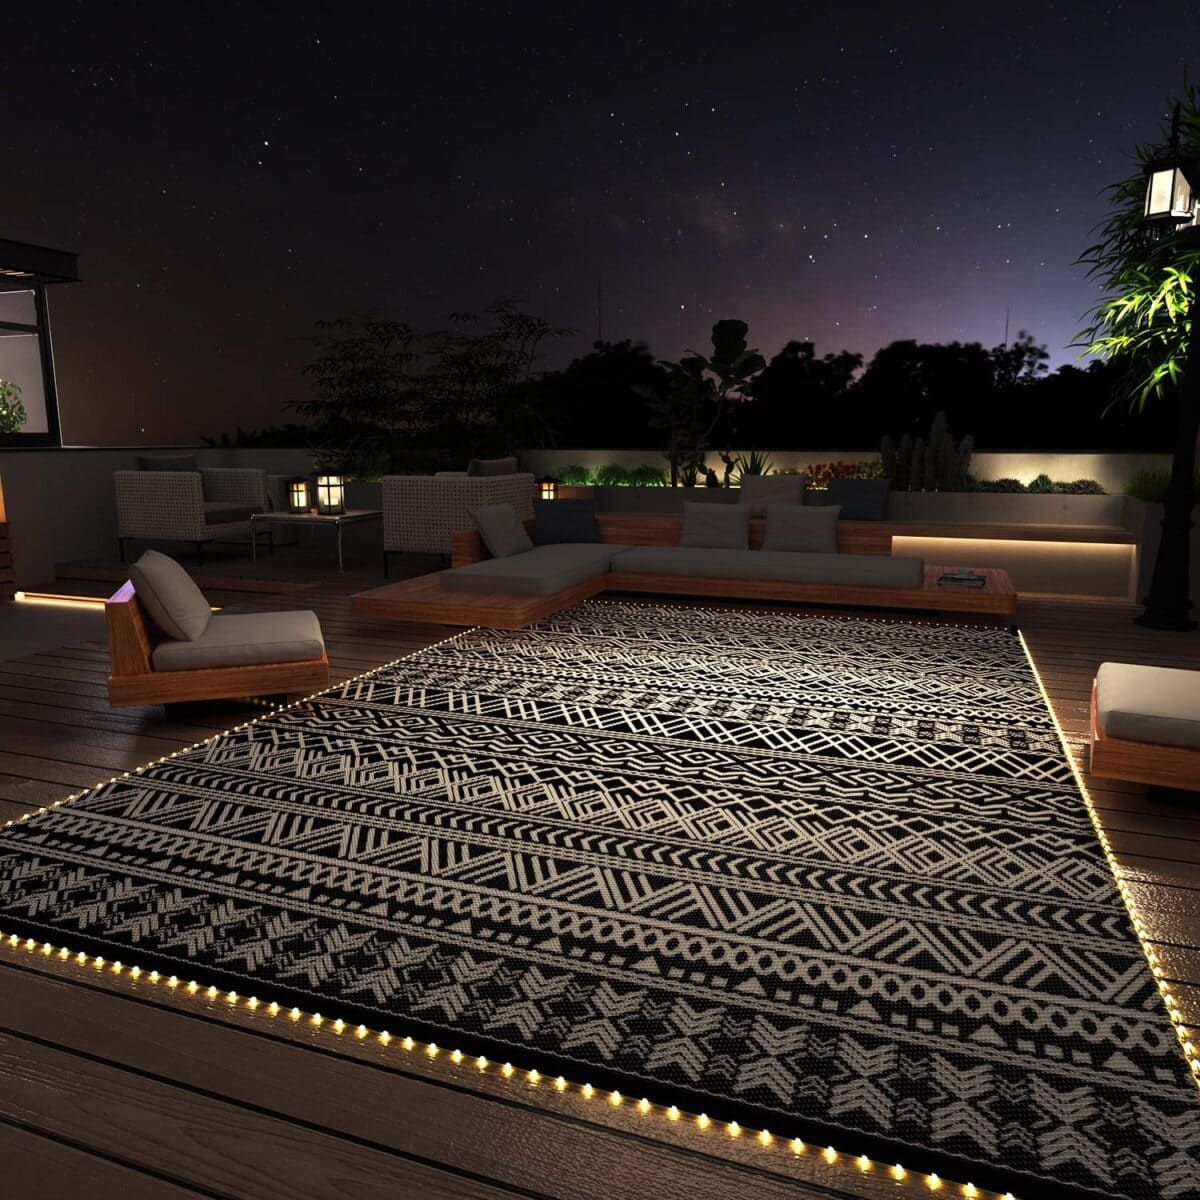 What You Should Know About Montvoo Outdoor Rug With Led 9x12 Ft Before